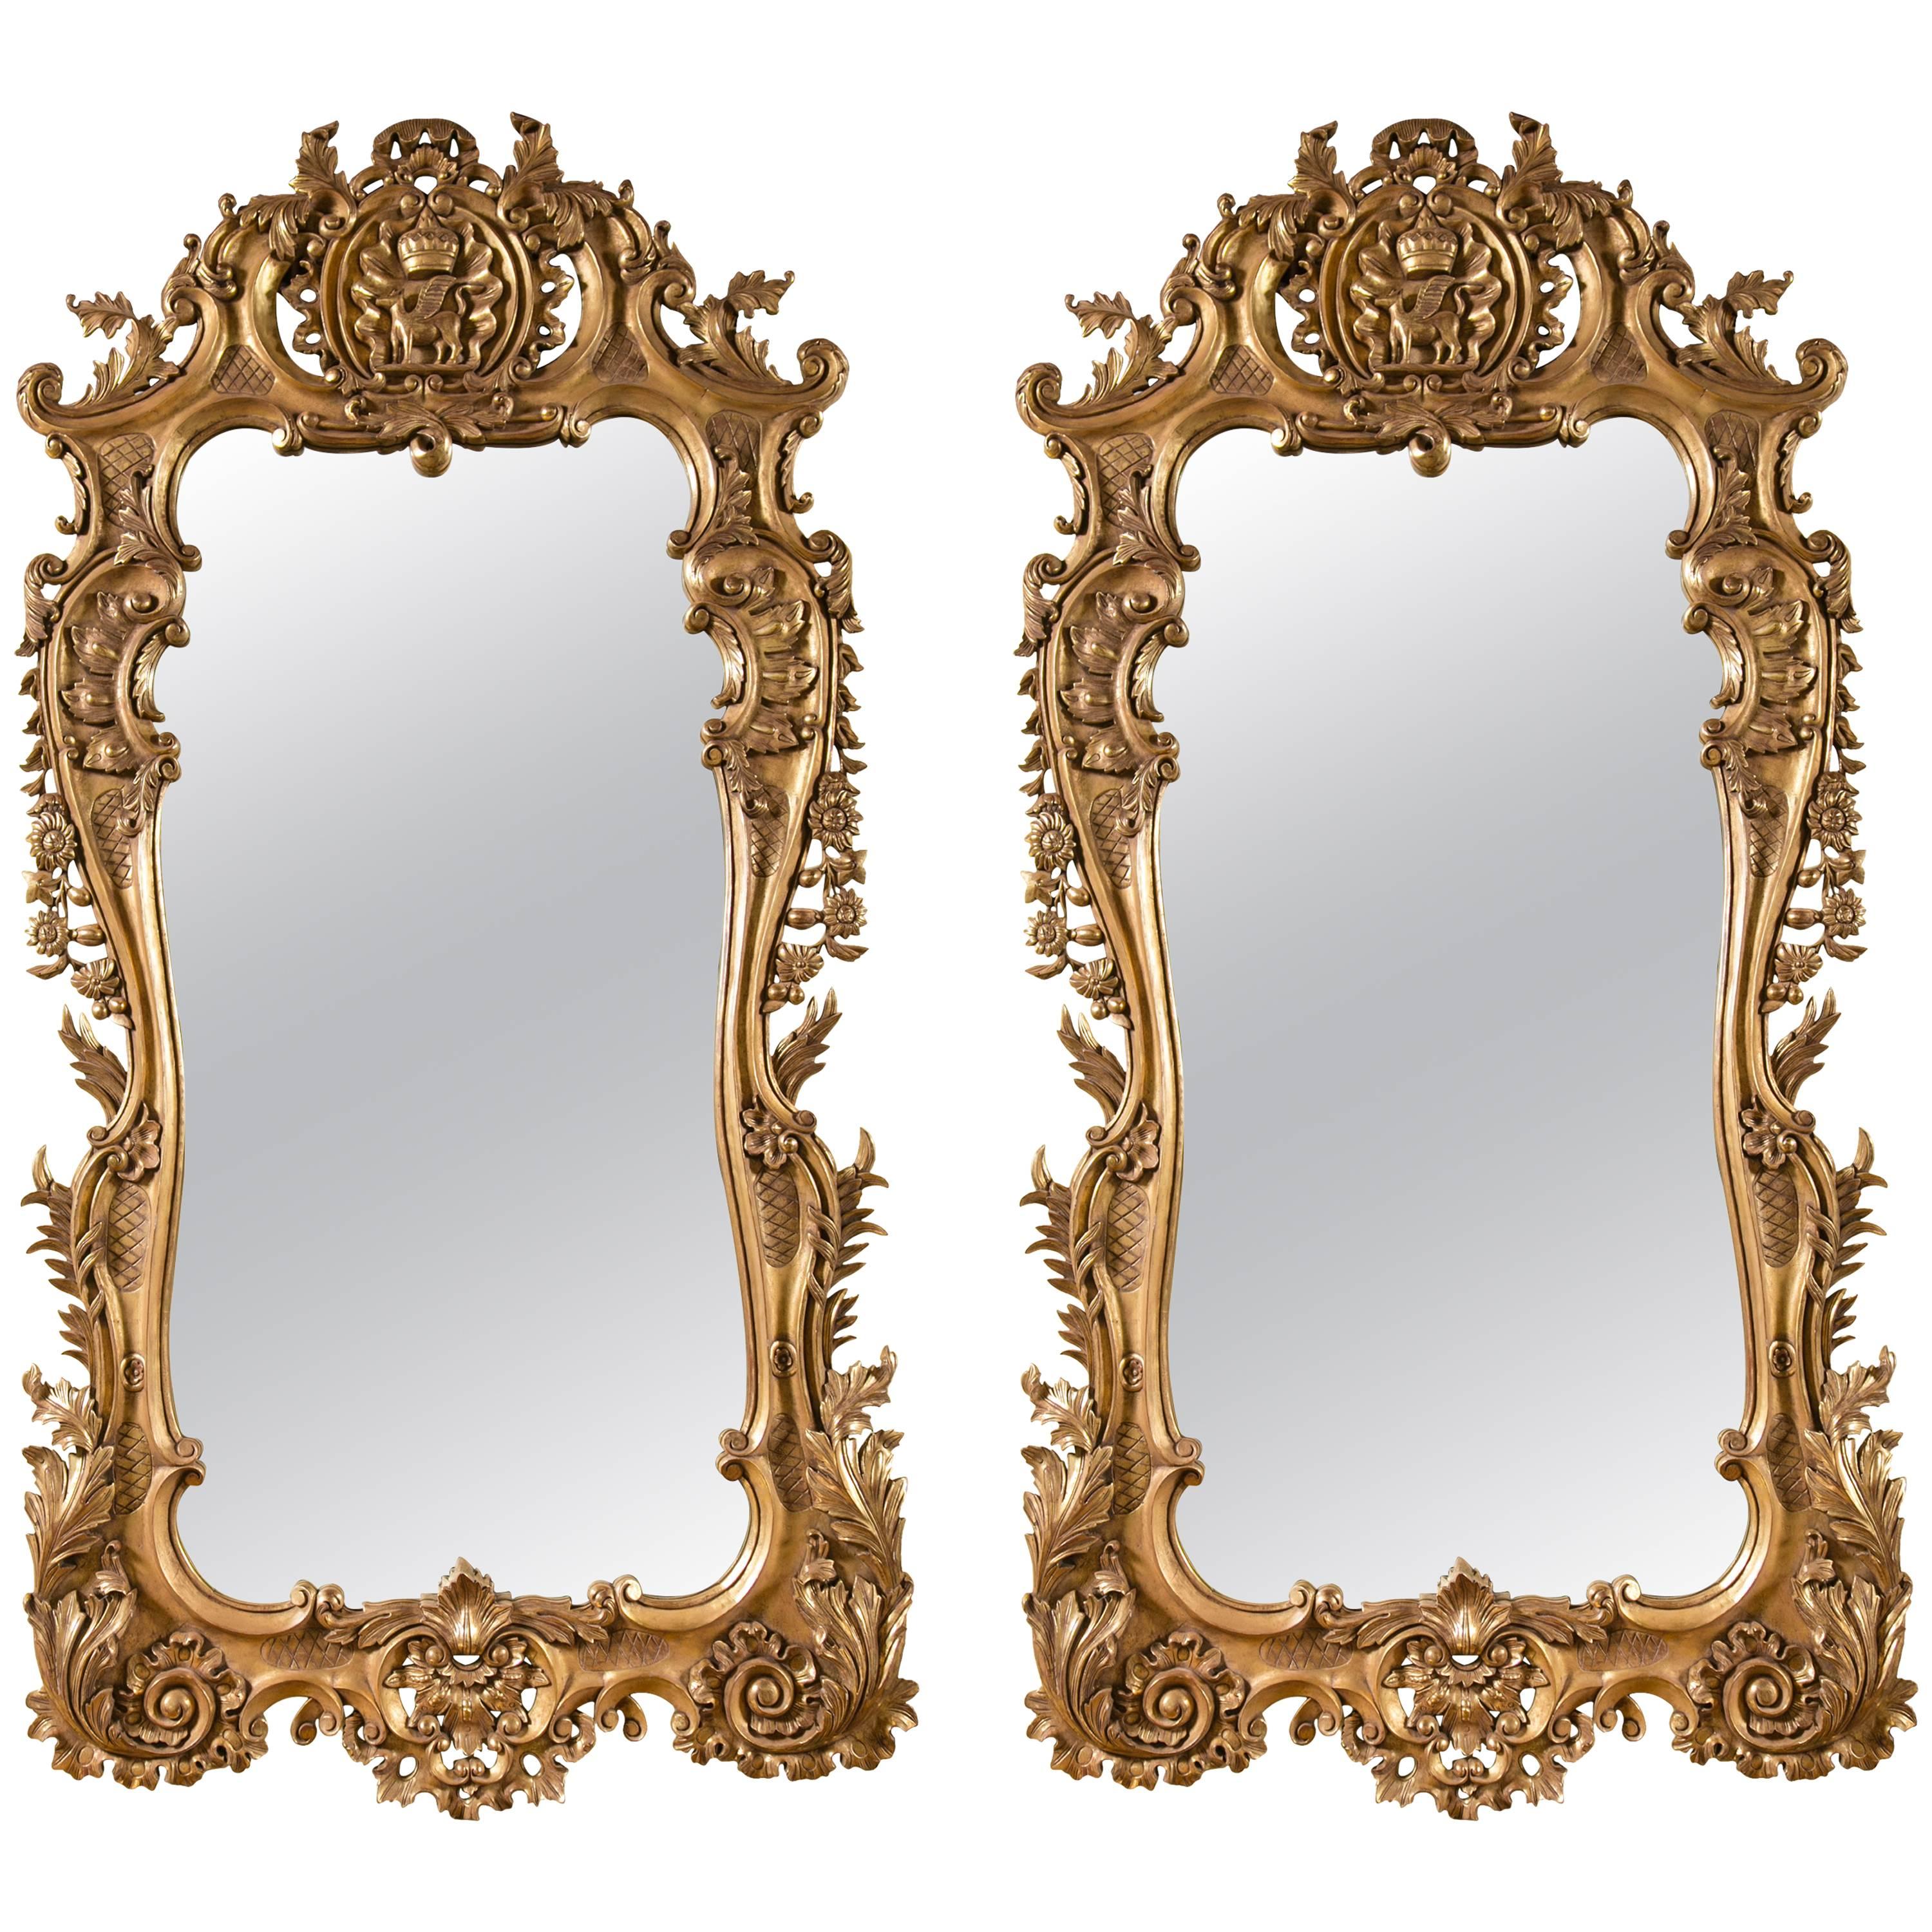 Pair of Monumental Louis XV Style Giltwood Mirrors Exquisite Details